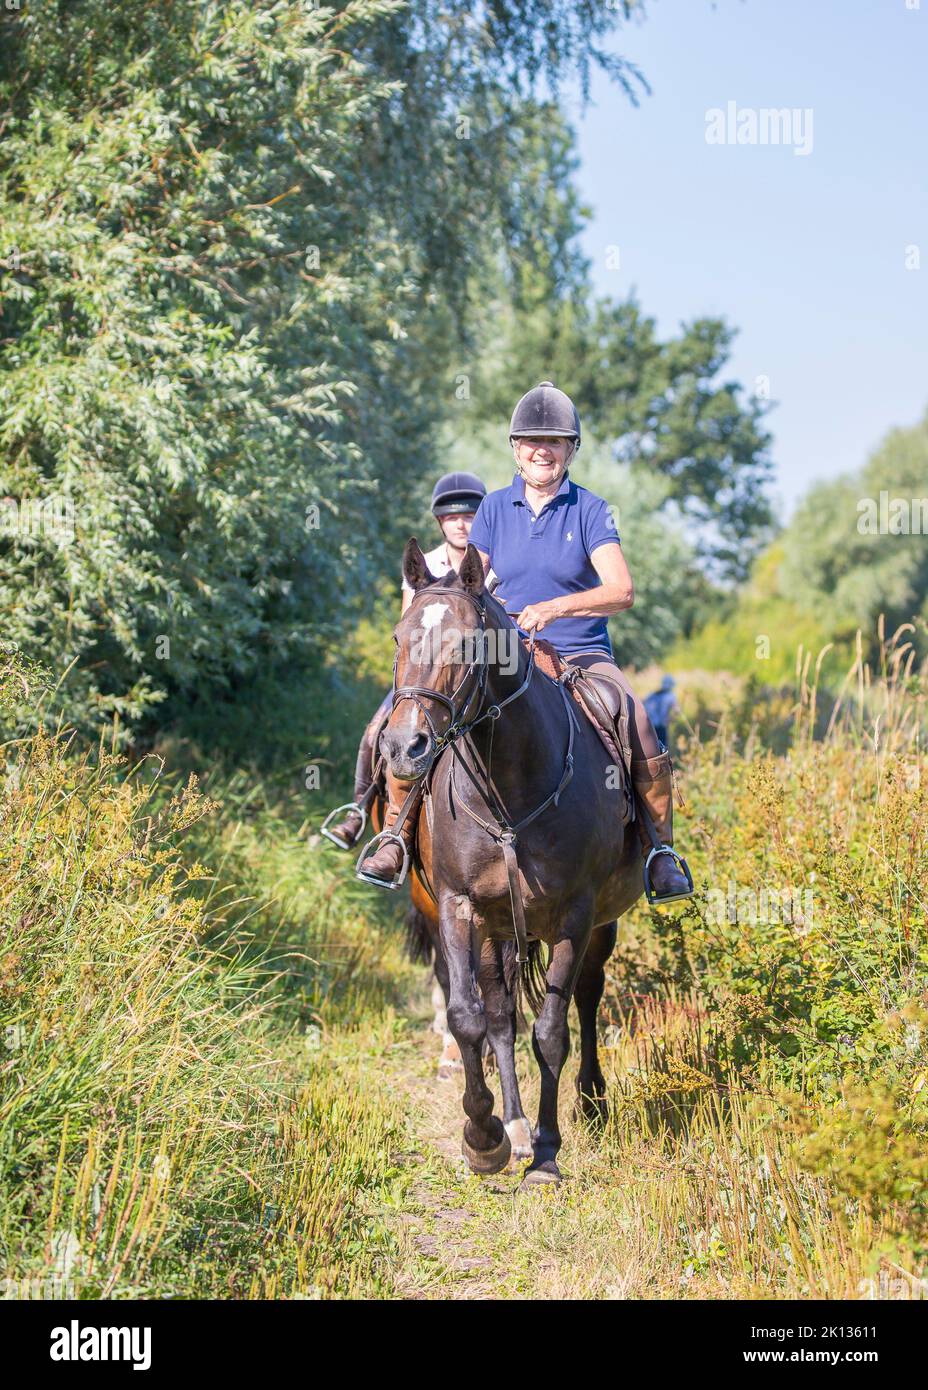 Front view of a smiling lady rider on a horse on a UK country path, bridleway on a hot summer day. Stock Photo